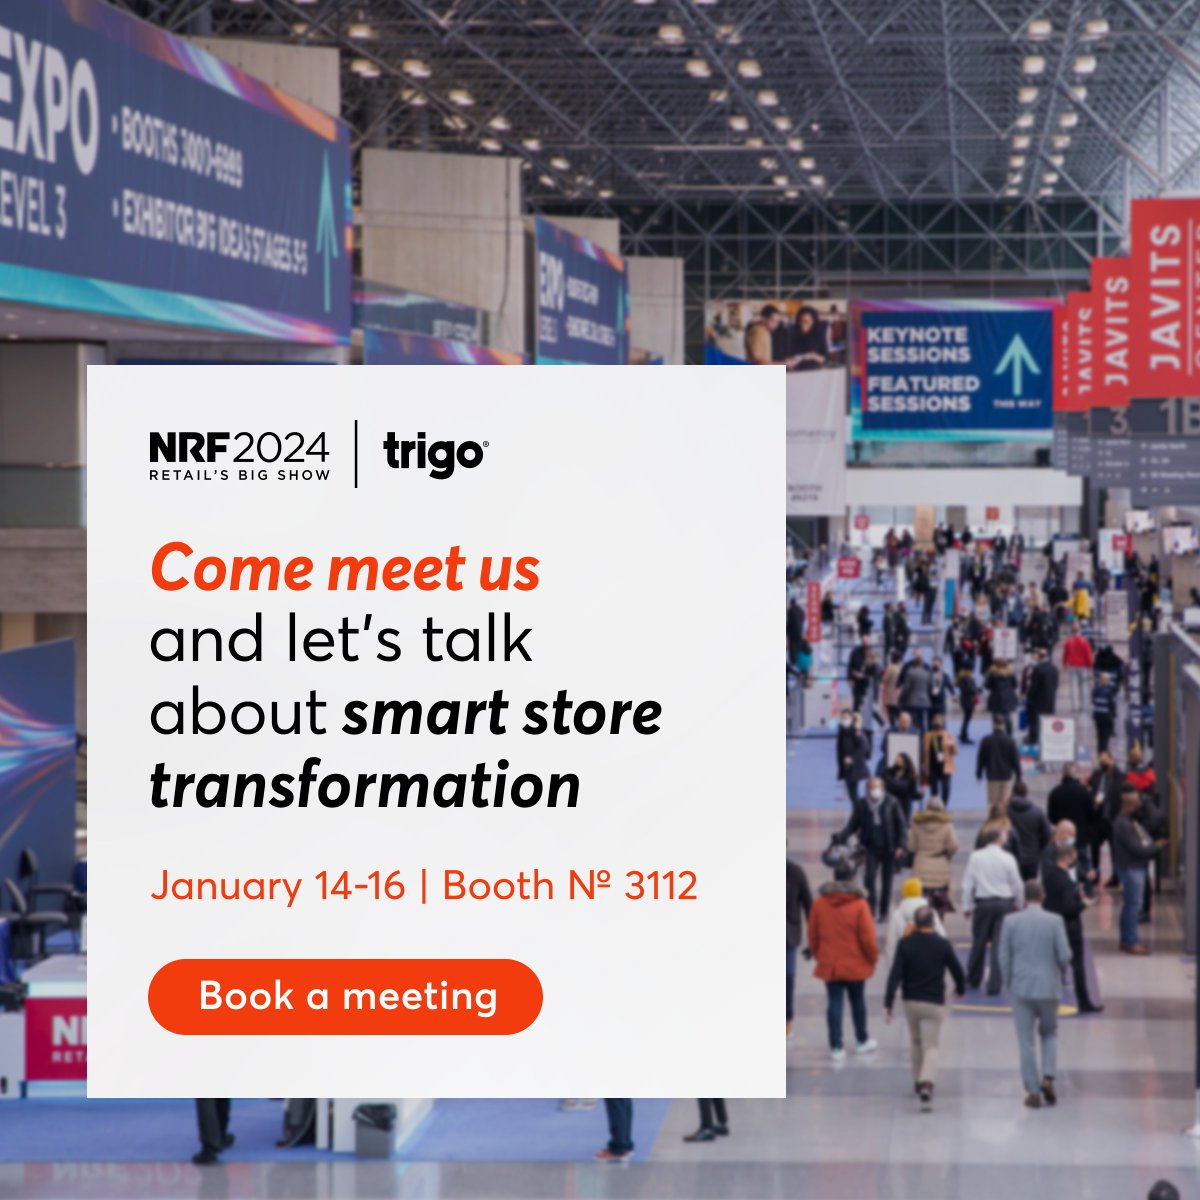 They call it BIG for a reason. Trigo is heading to NRF 2024 - Retail's Big Show! Join us as we unveil our latest innovations in computer vision for retail, including our industry-defining REAL-TIME receipt capabilities. Book now: bit.ly/3R0SeFC